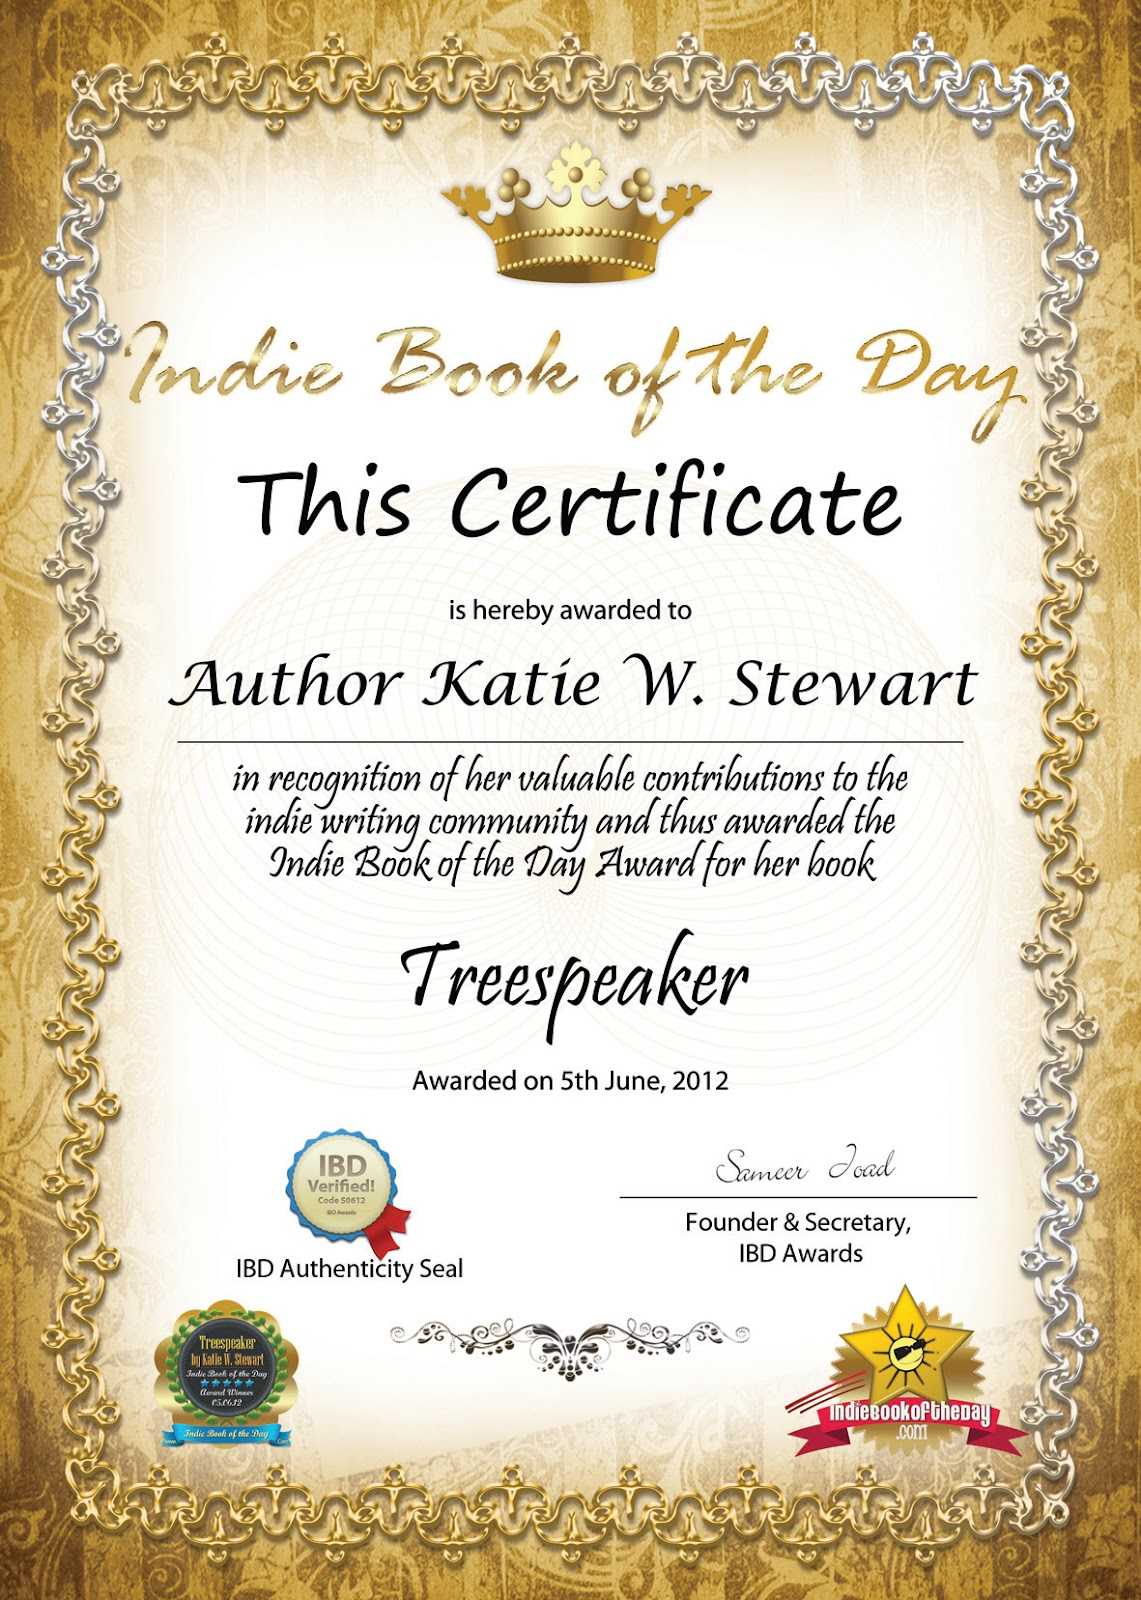 Small Certificate Template ] - Free Gift Certificate Regarding Small Certificate Template